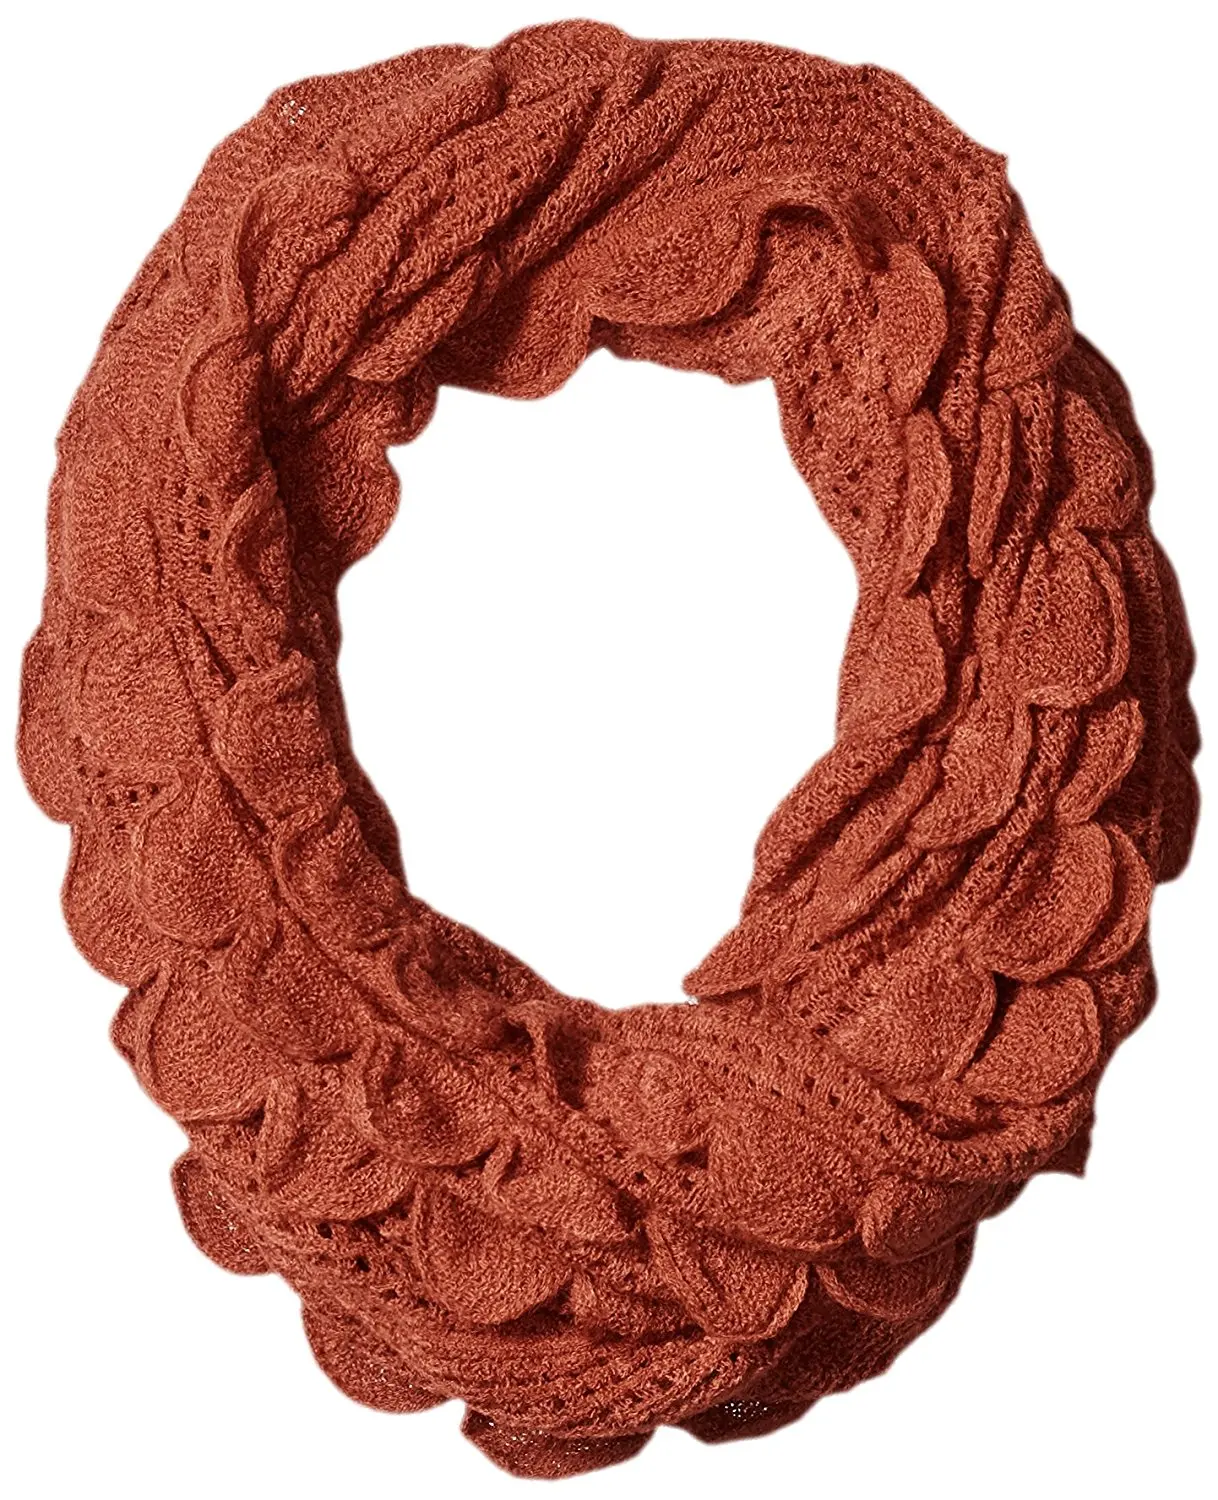 Cheap Knitted Ruffle Scarf Pattern Find Knitted Ruffle - 